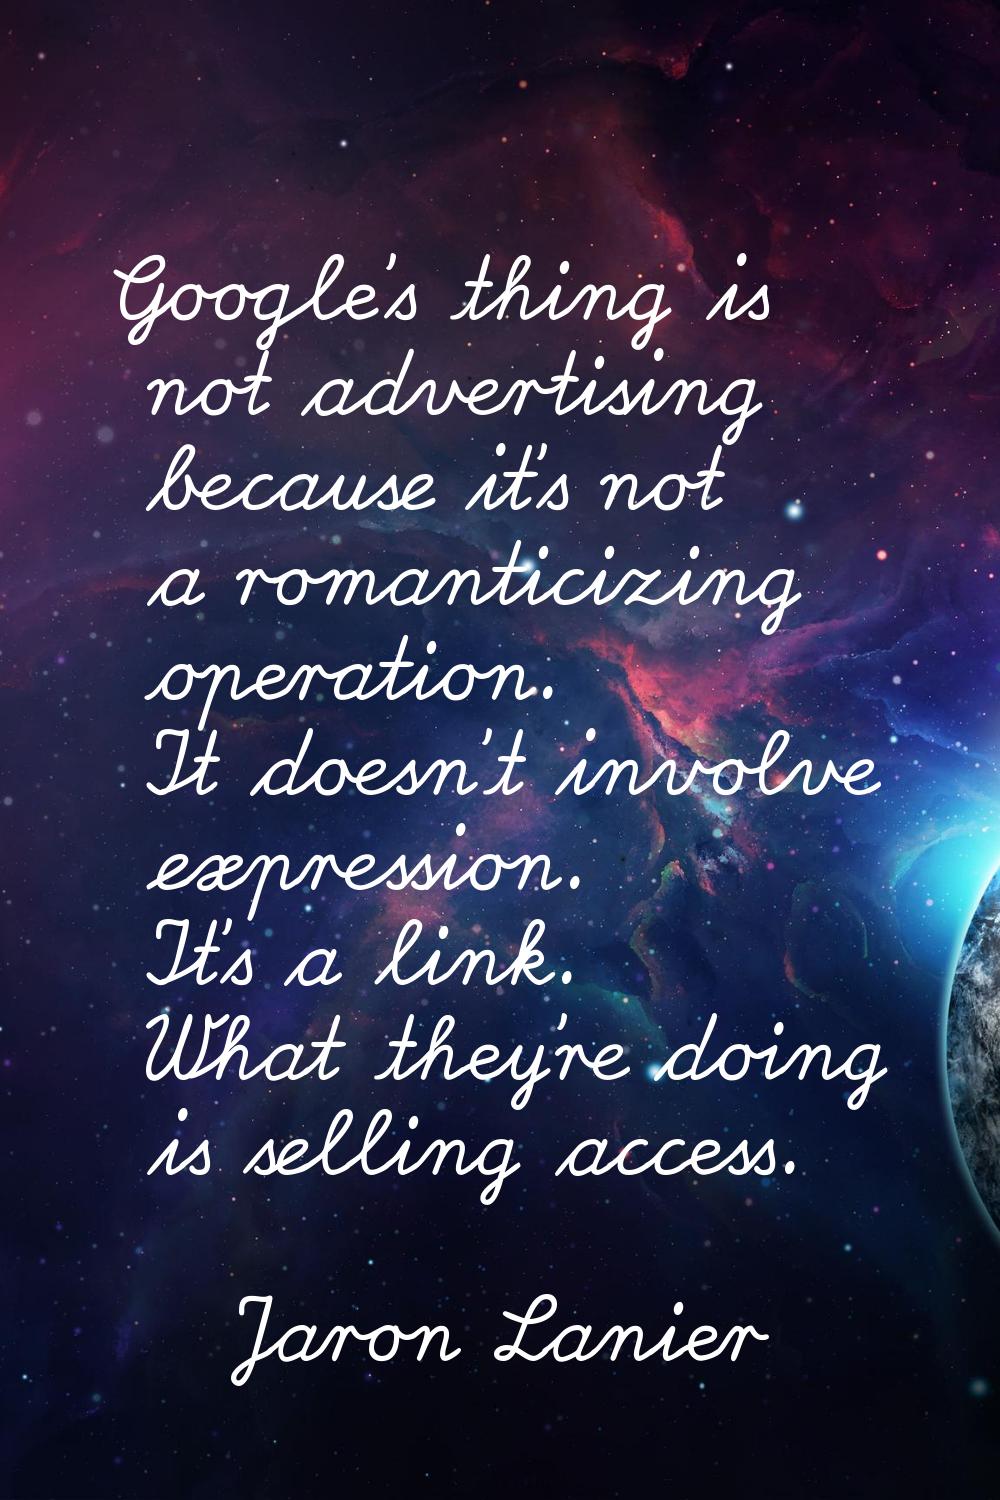 Google's thing is not advertising because it's not a romanticizing operation. It doesn't involve ex